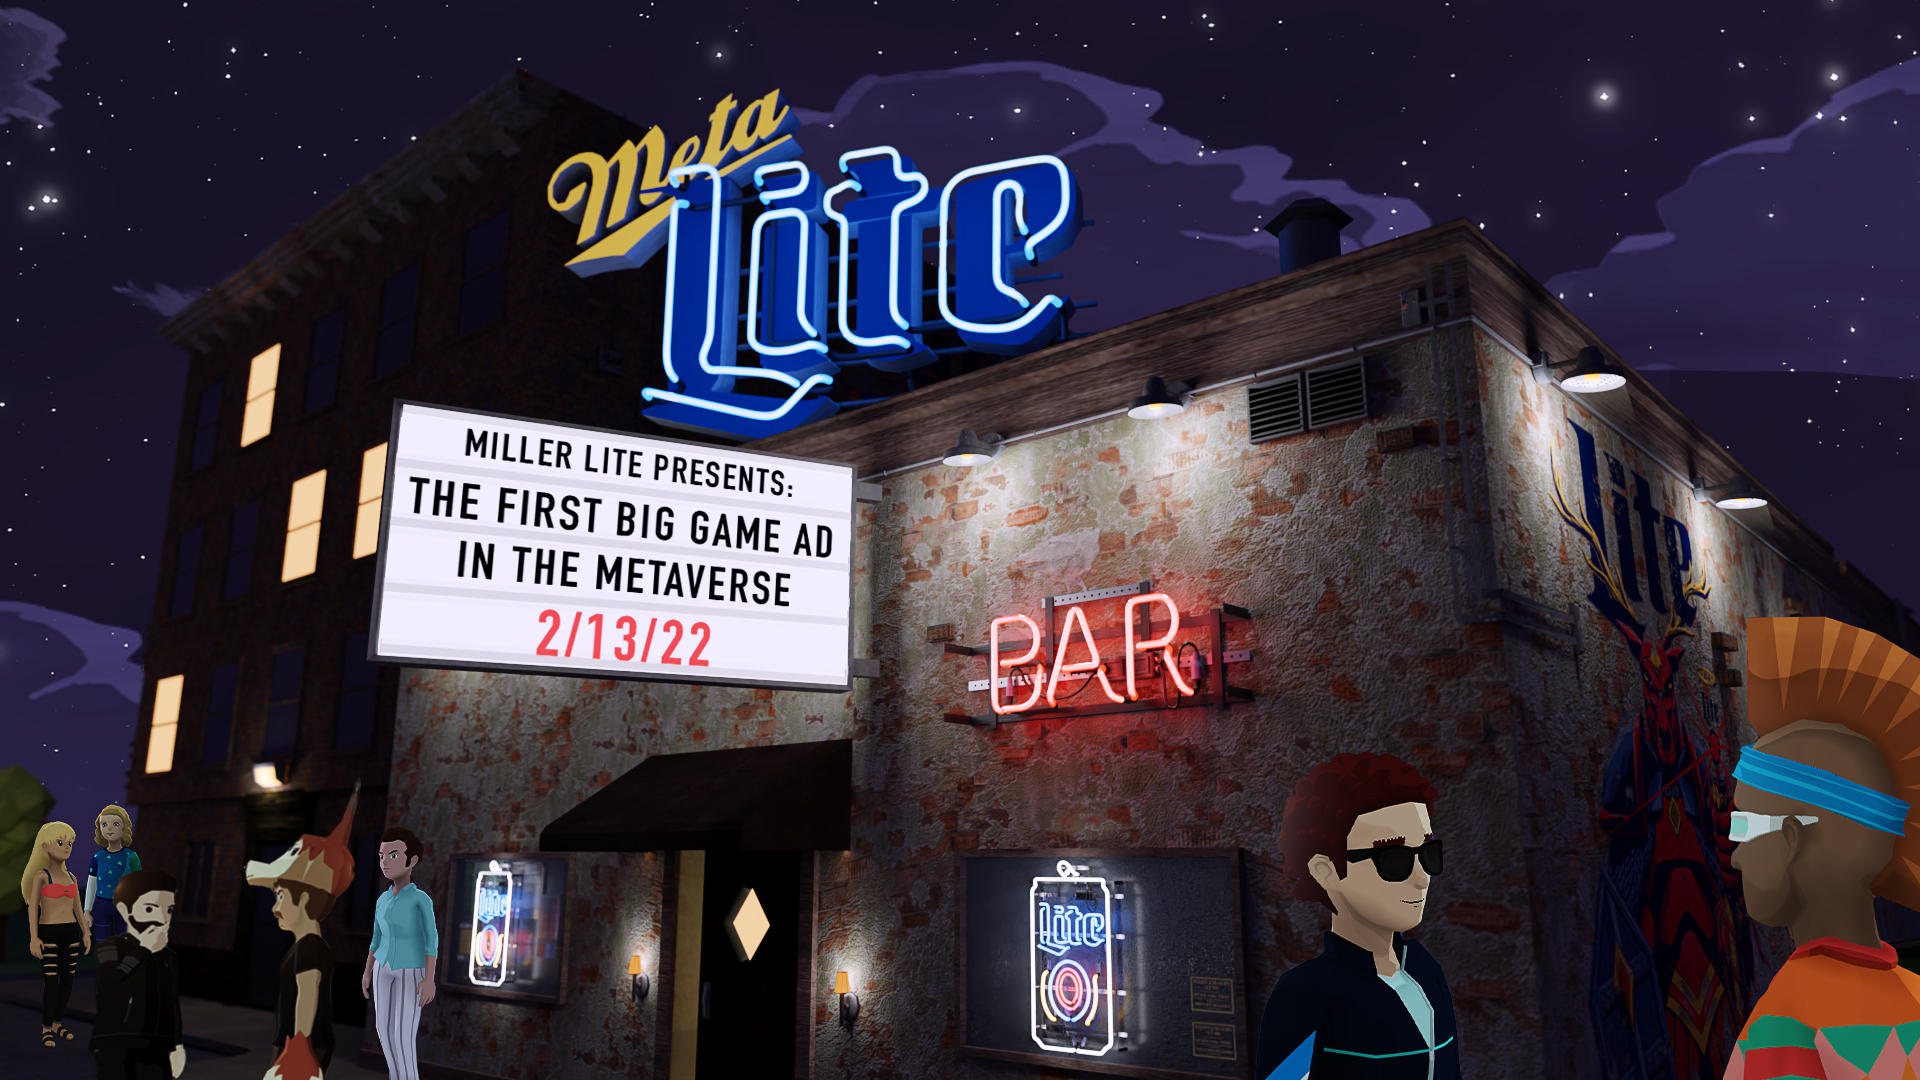 m ss ng p eces - Miller Lite – Definitely, Probably a Big Game Ad